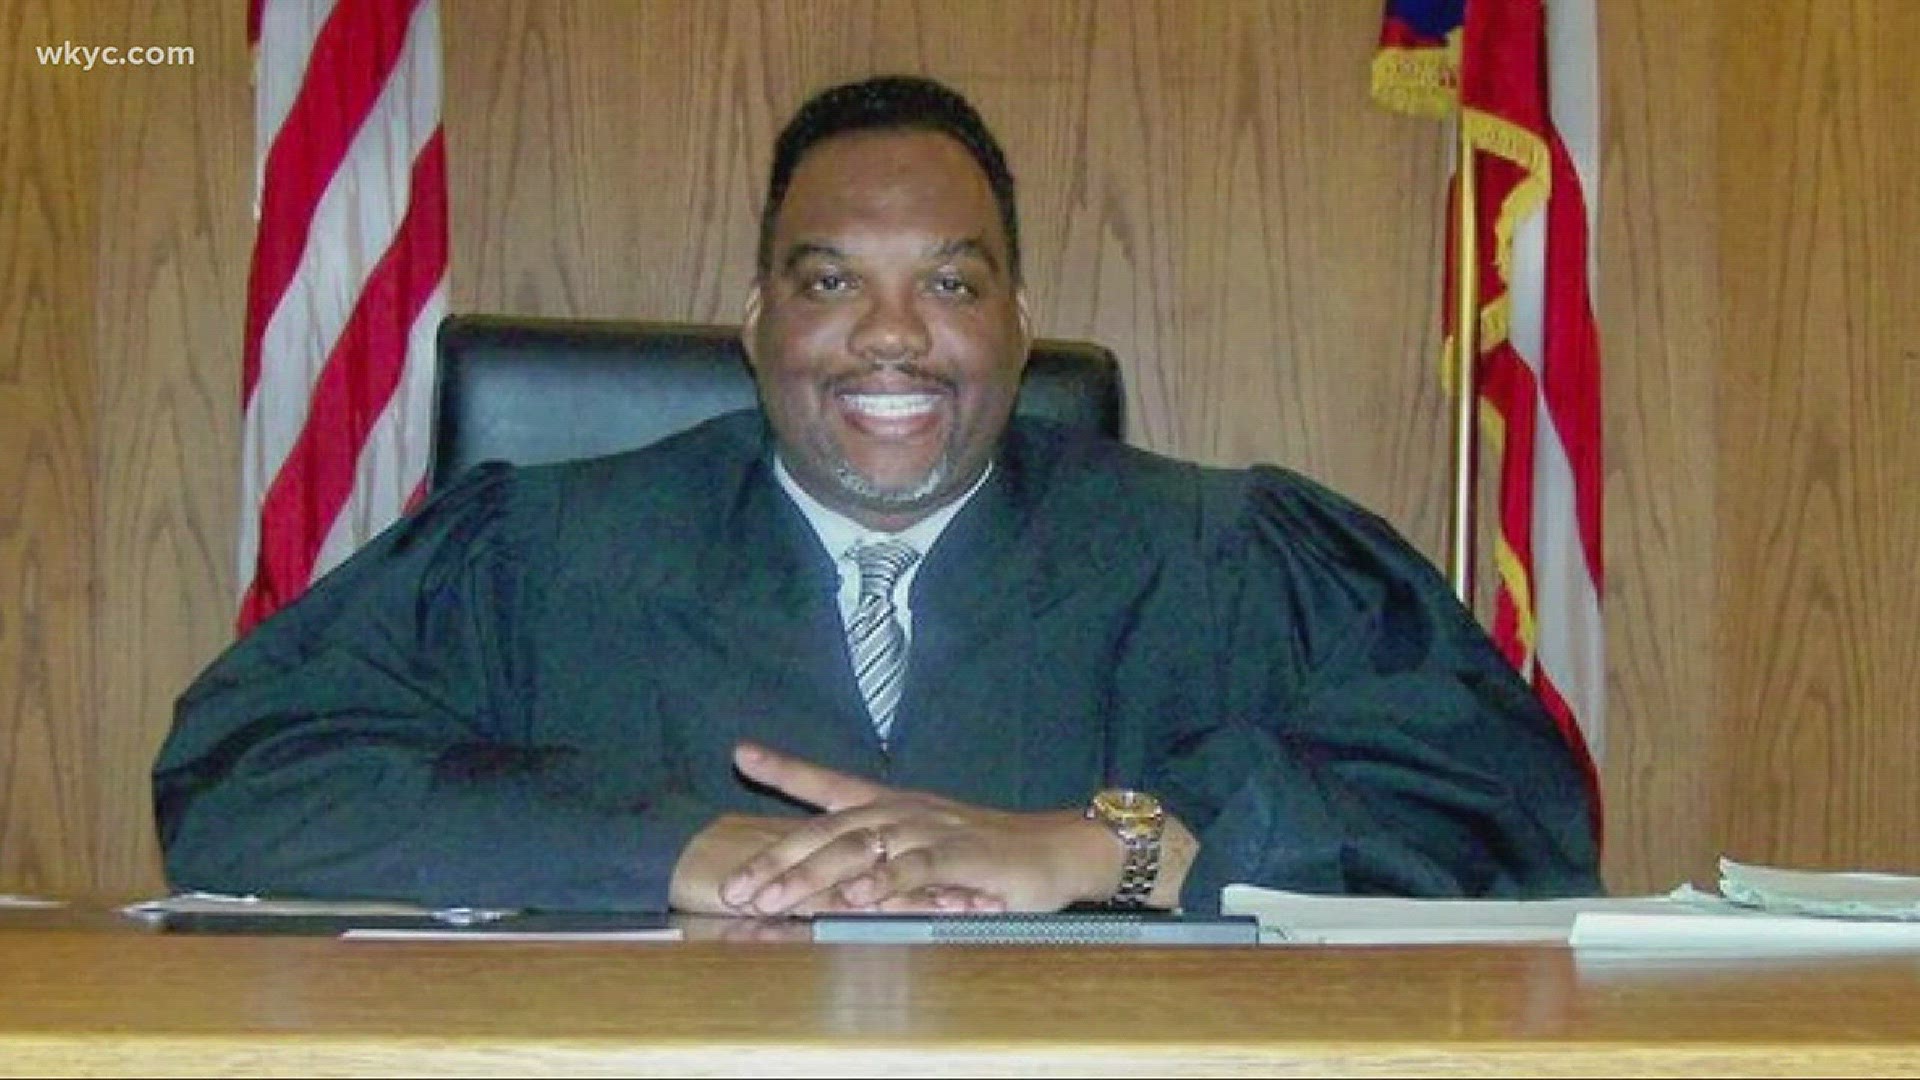 The Investigator: Disgraced judge leaves prison, hired by Cleveland City Hall